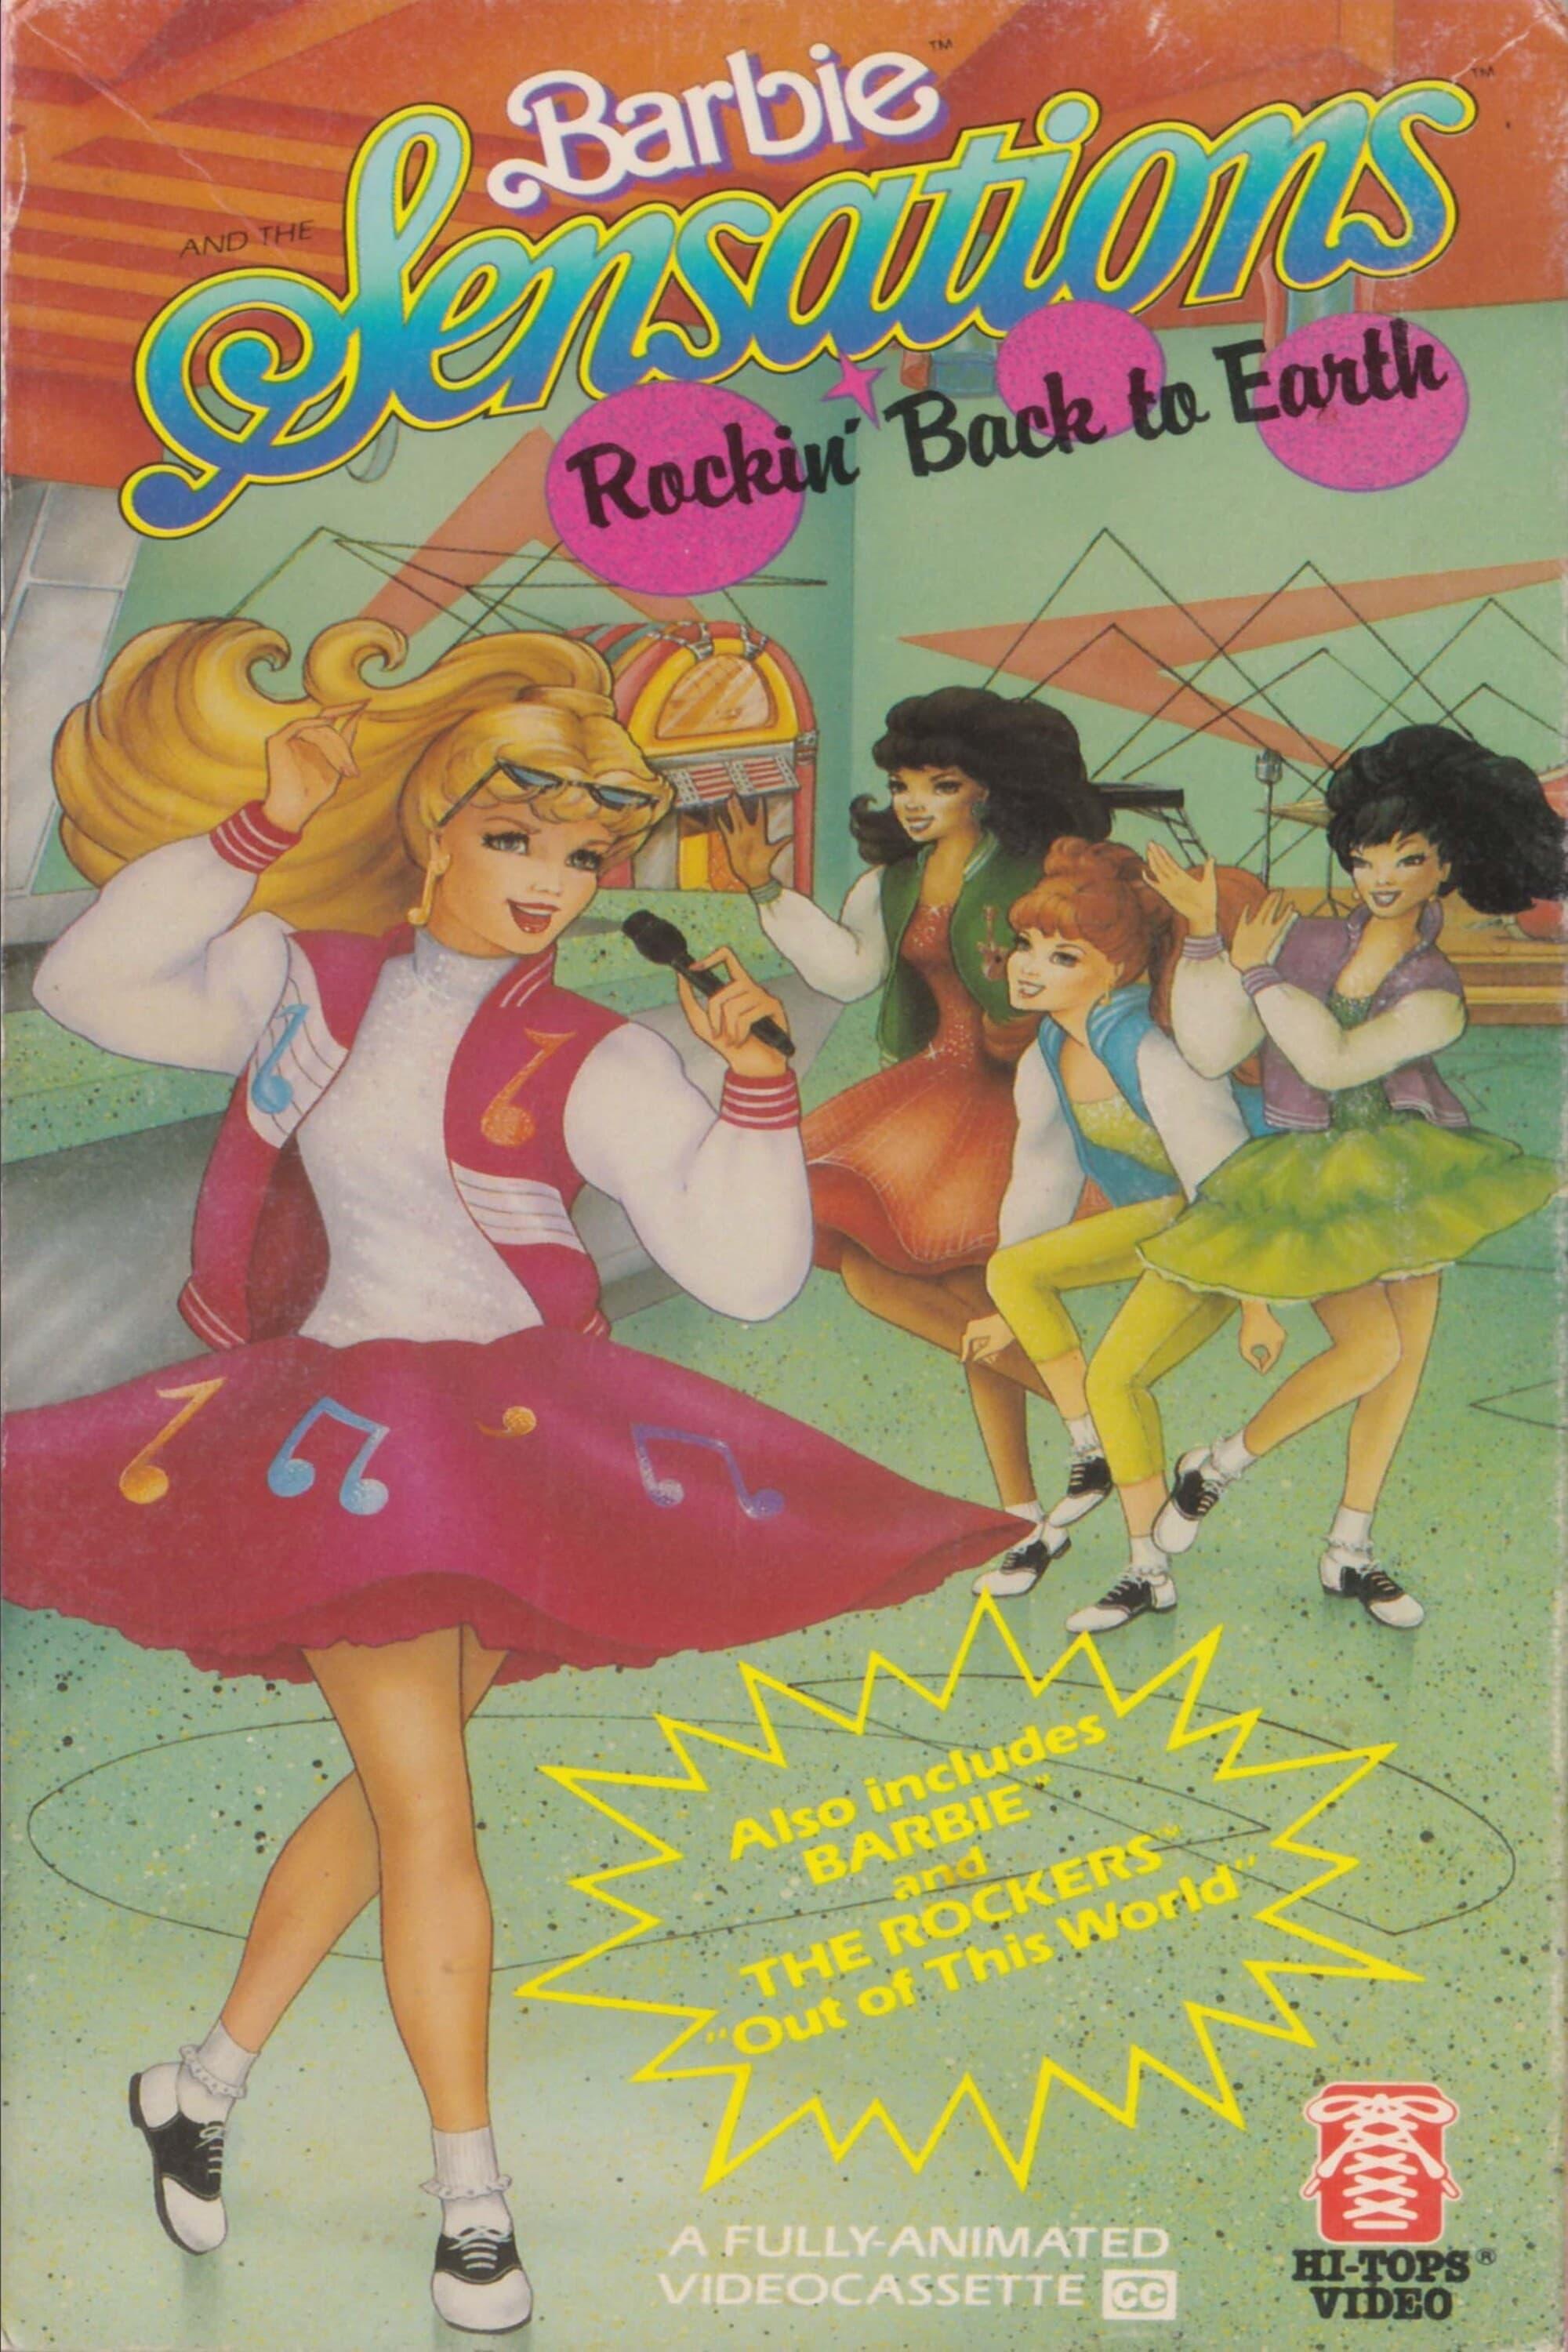 Barbie and the Sensations: Rockin' Back to Earth poster